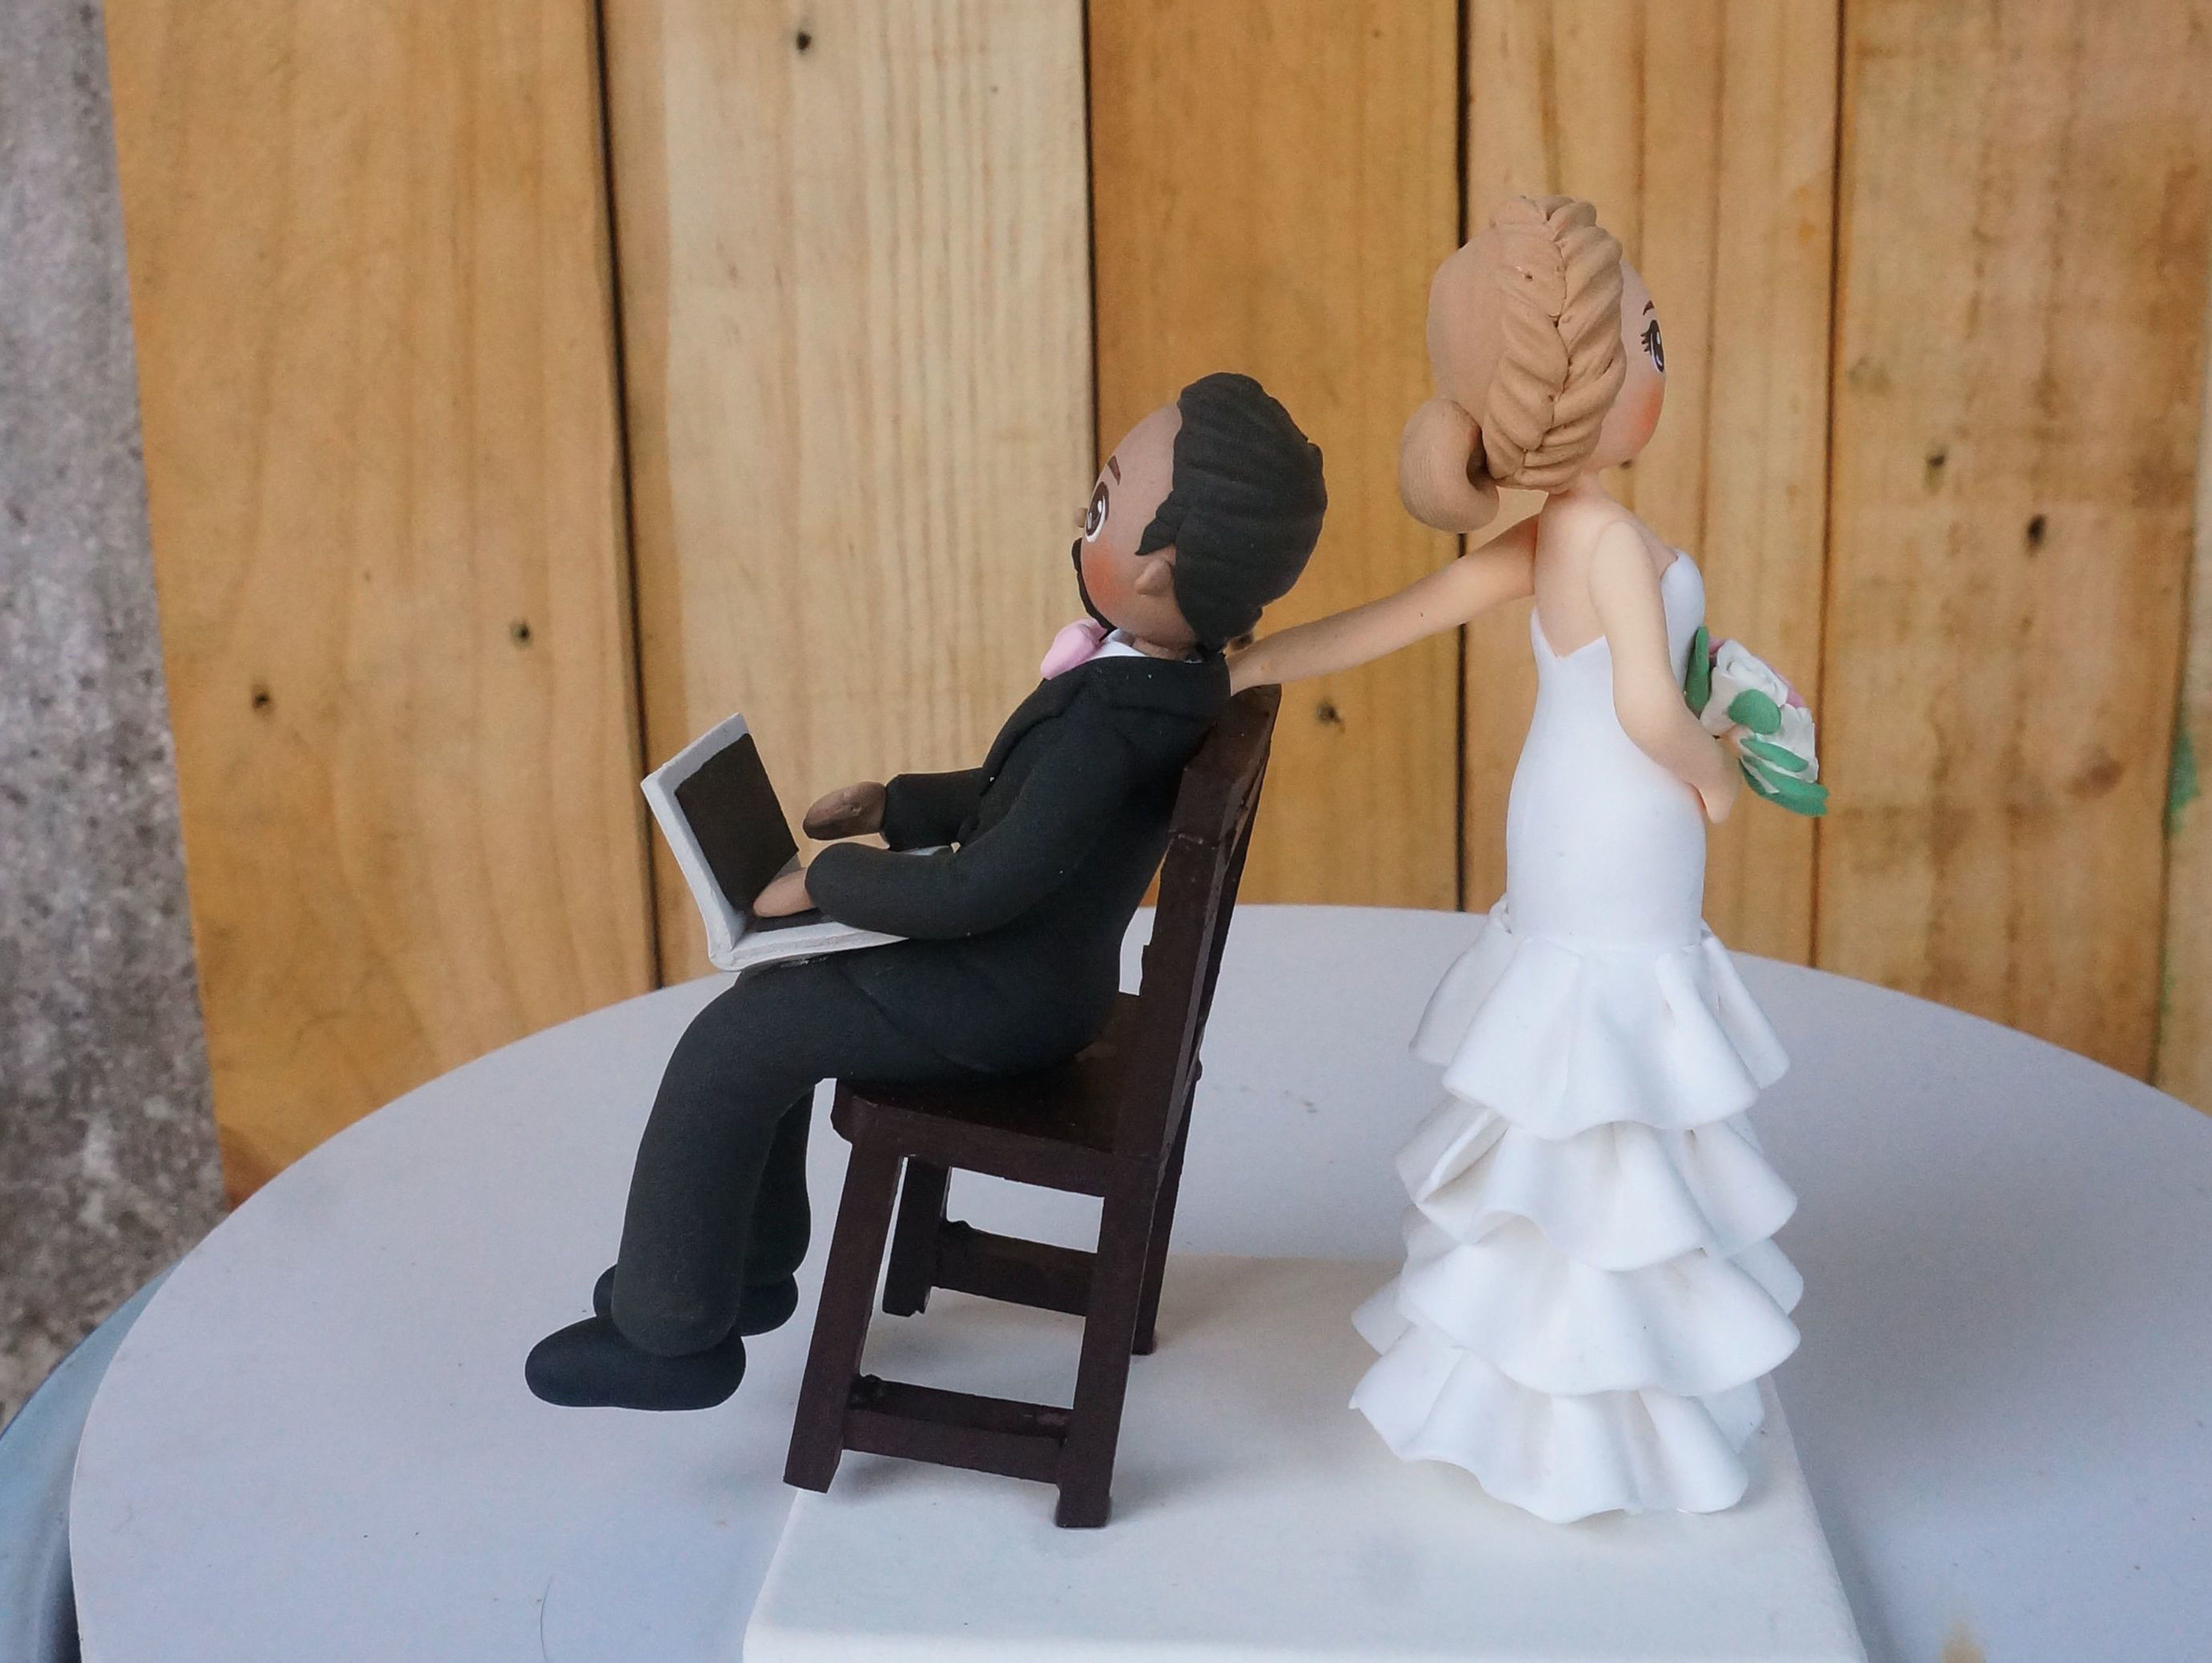 Picture of Funny Wedding cake topper, Geek wedding topper, Gamer wedding cake topper - CLEARANCE